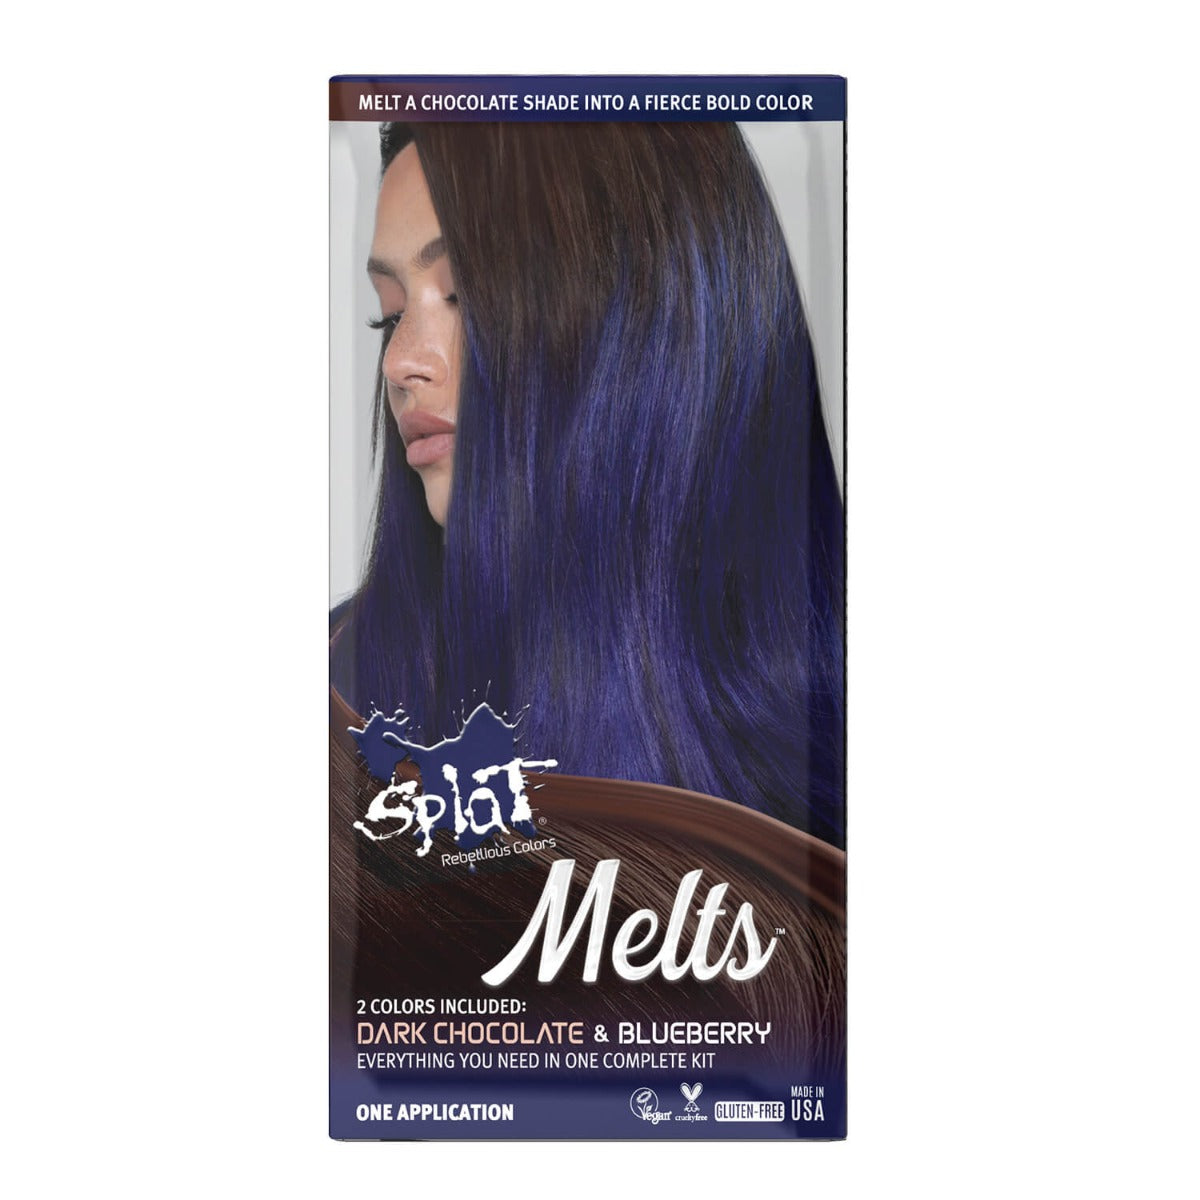 Melts Complete Kit with Bleach and 2 Semi-Permanent Colors - Dark Chocolate &amp; Blueberry